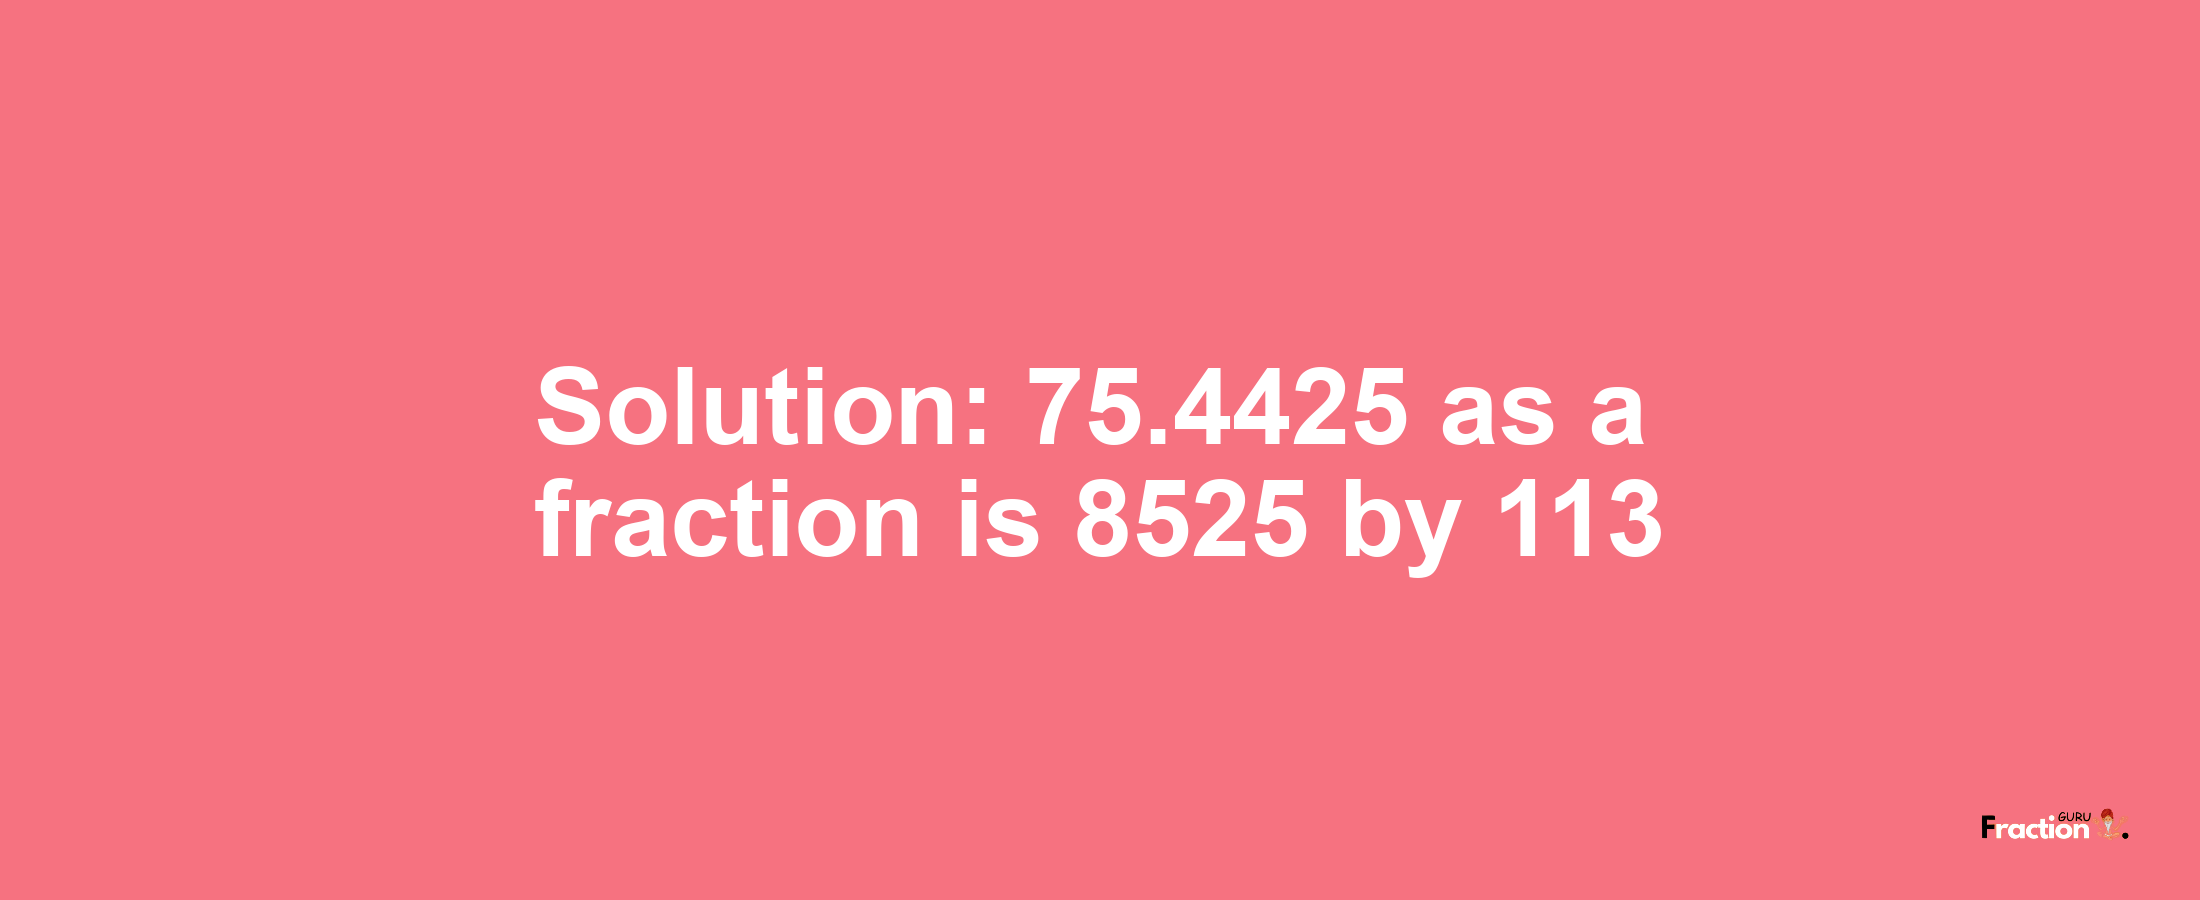 Solution:75.4425 as a fraction is 8525/113